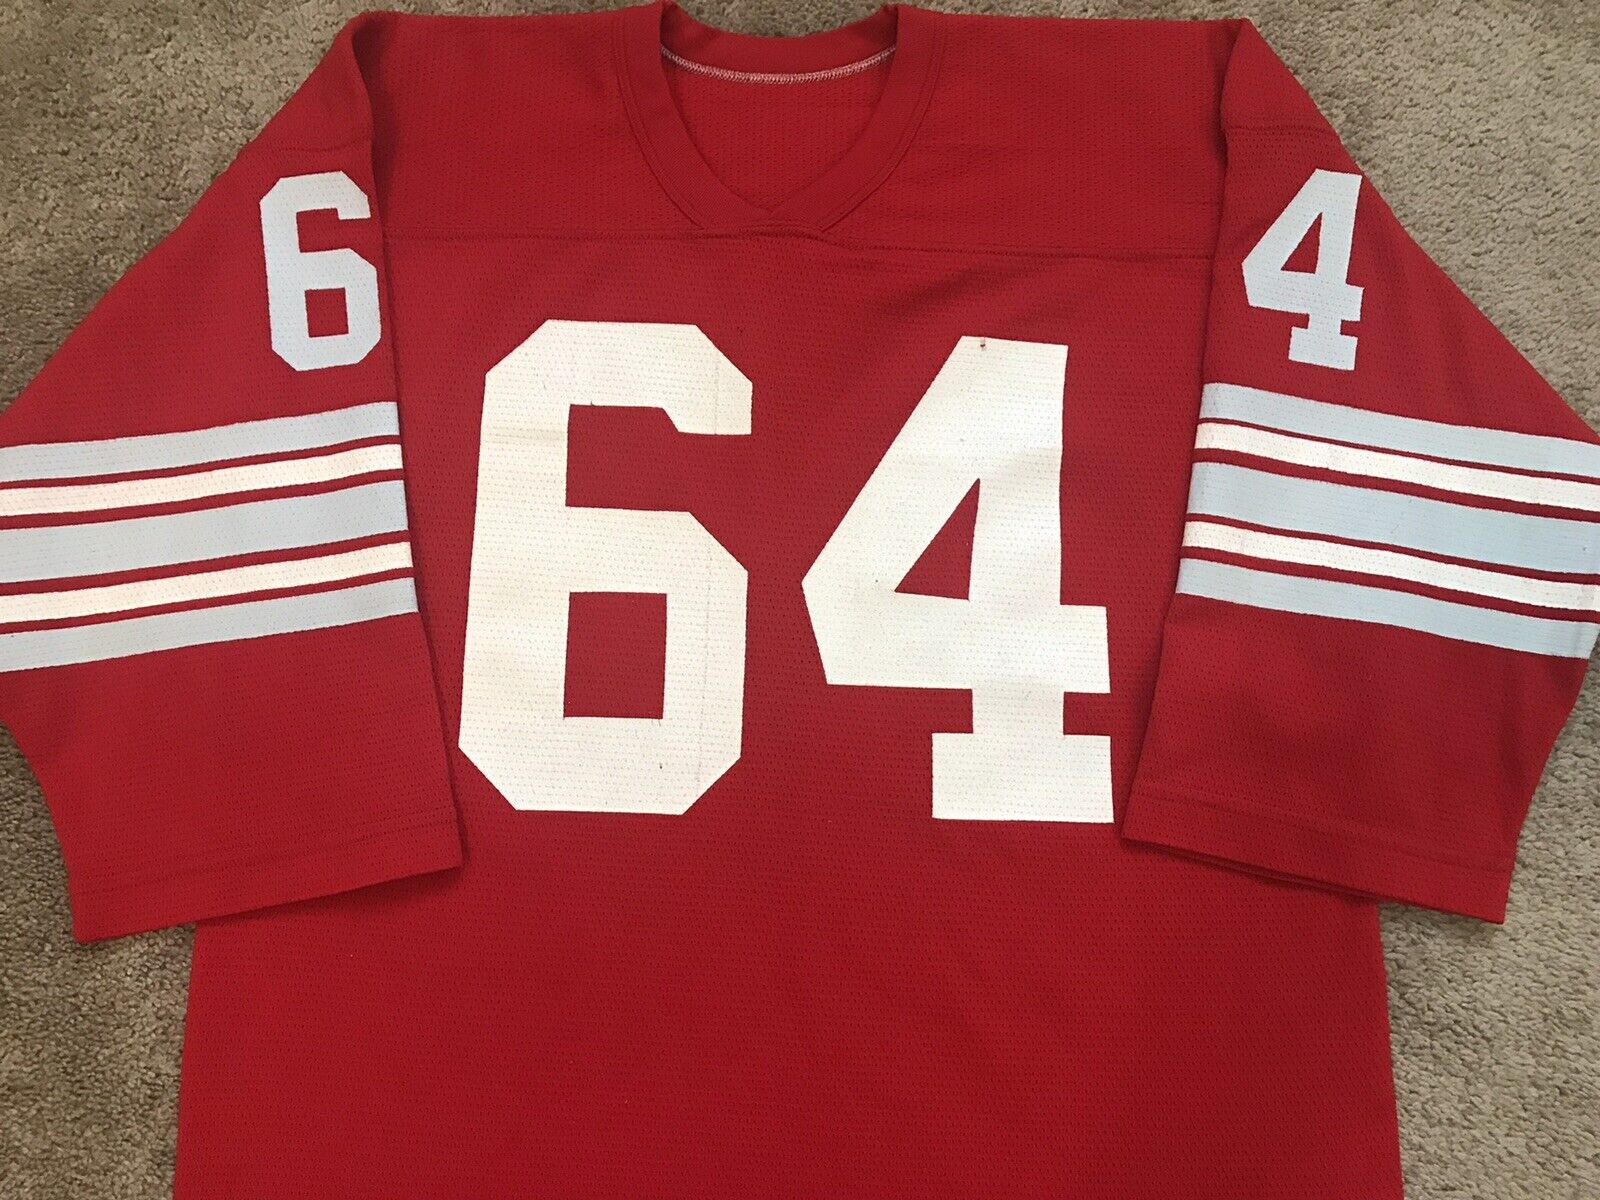 VINTAGE OHIO STATE #64 LATE 50's - EARLY 60's 3/4 SLEEVE FOOTBALL JERSEY XL  RARE